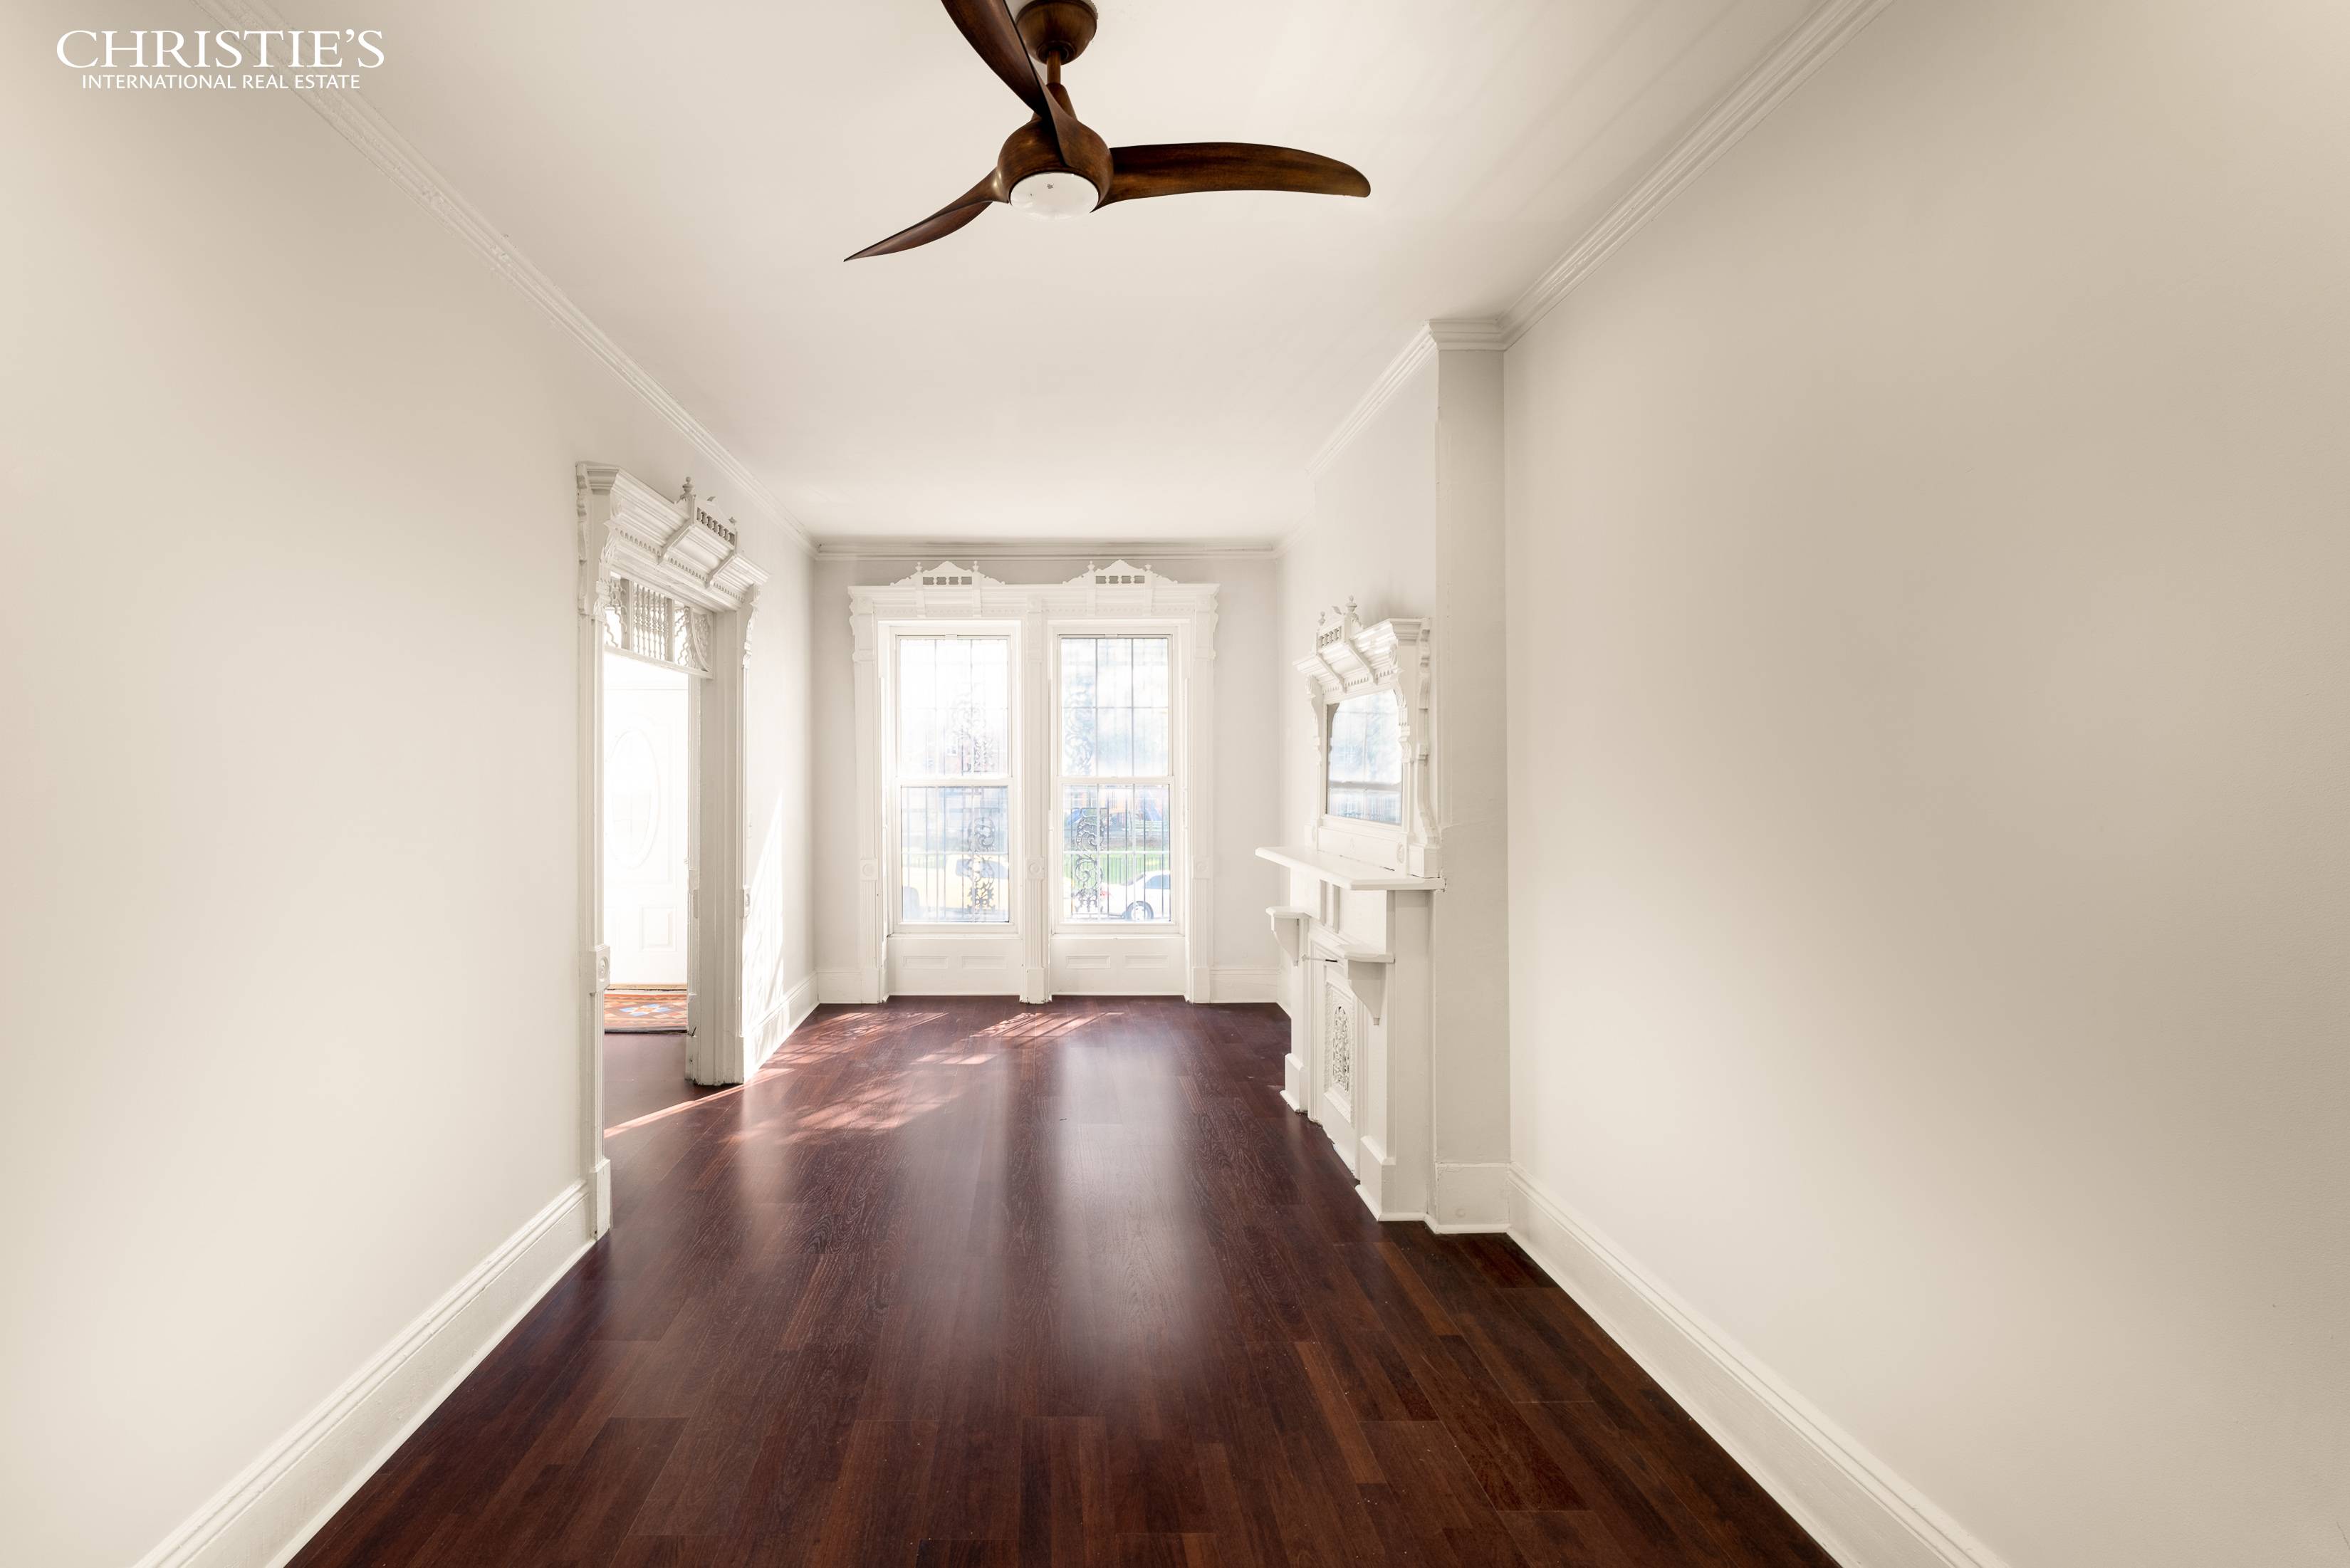 Live large in this renovated townhouse located in vibrant Crown Heights, one of Brooklyn's most exciting neighborhoods.